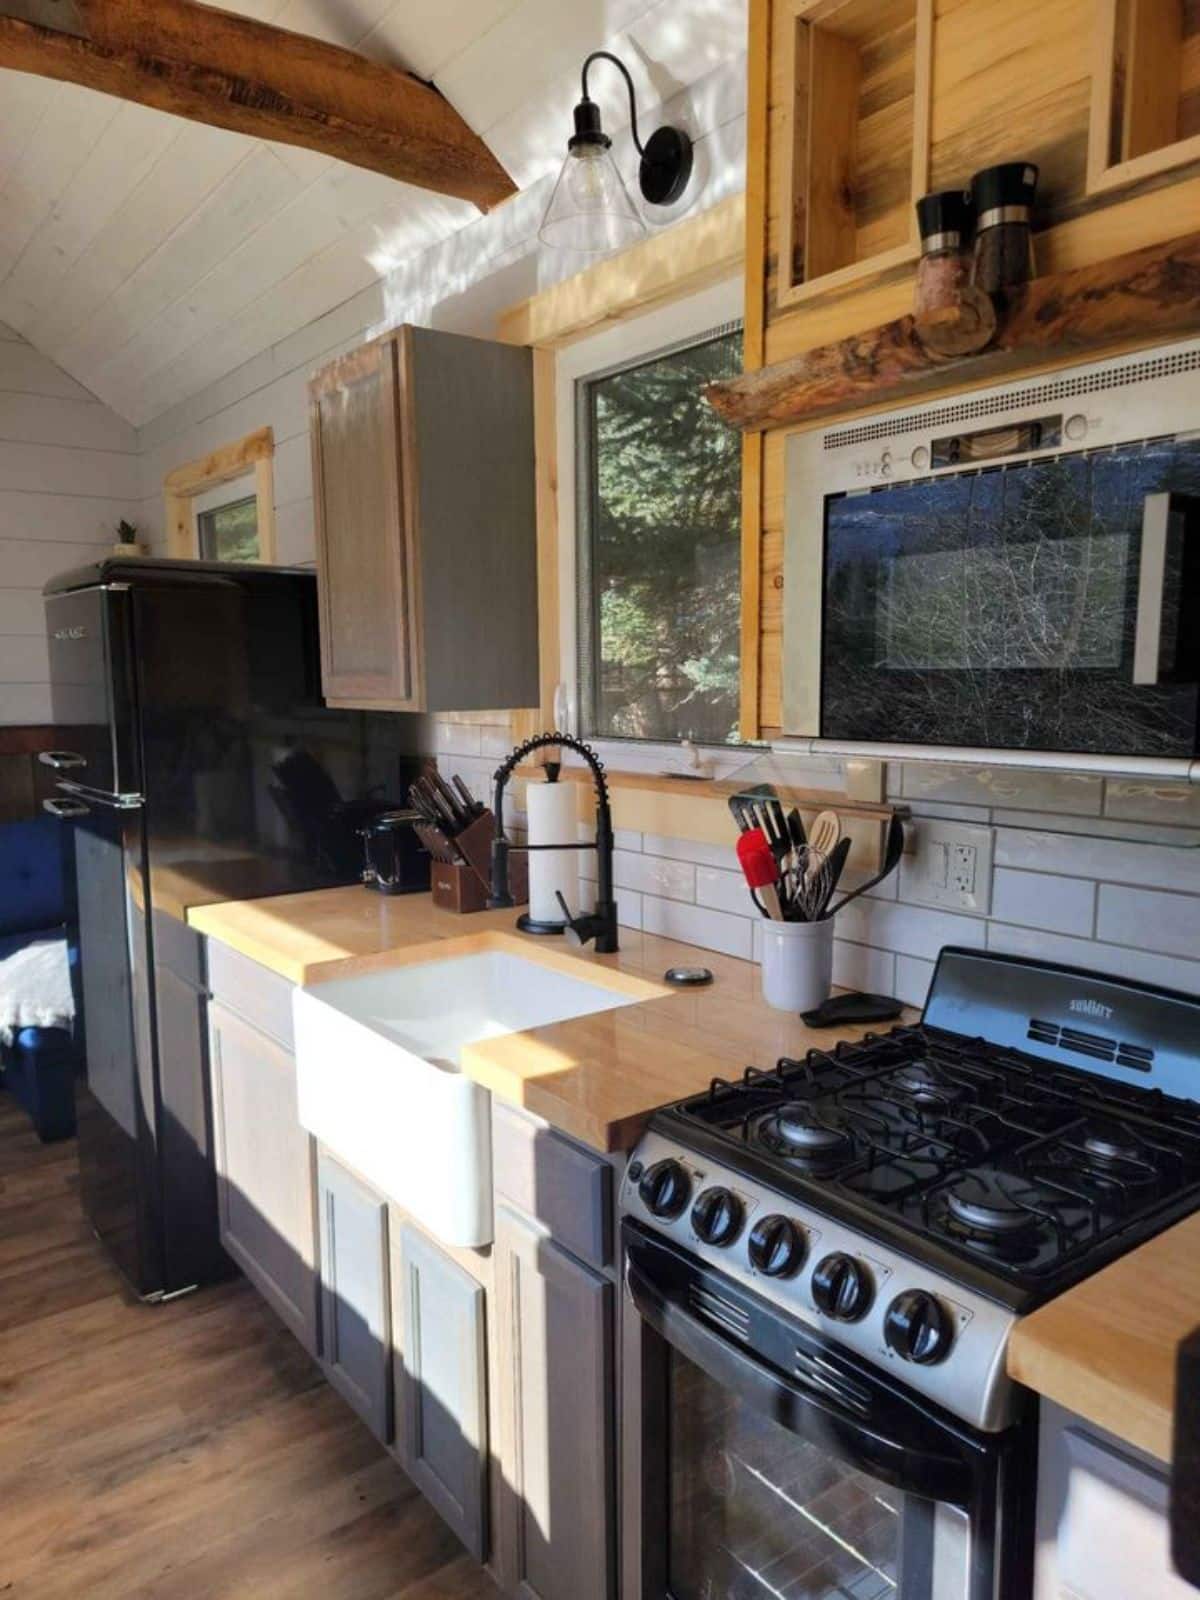 huge countertop with sink and double door refrigerator in the kitchen area of 1 bedroom tiny house